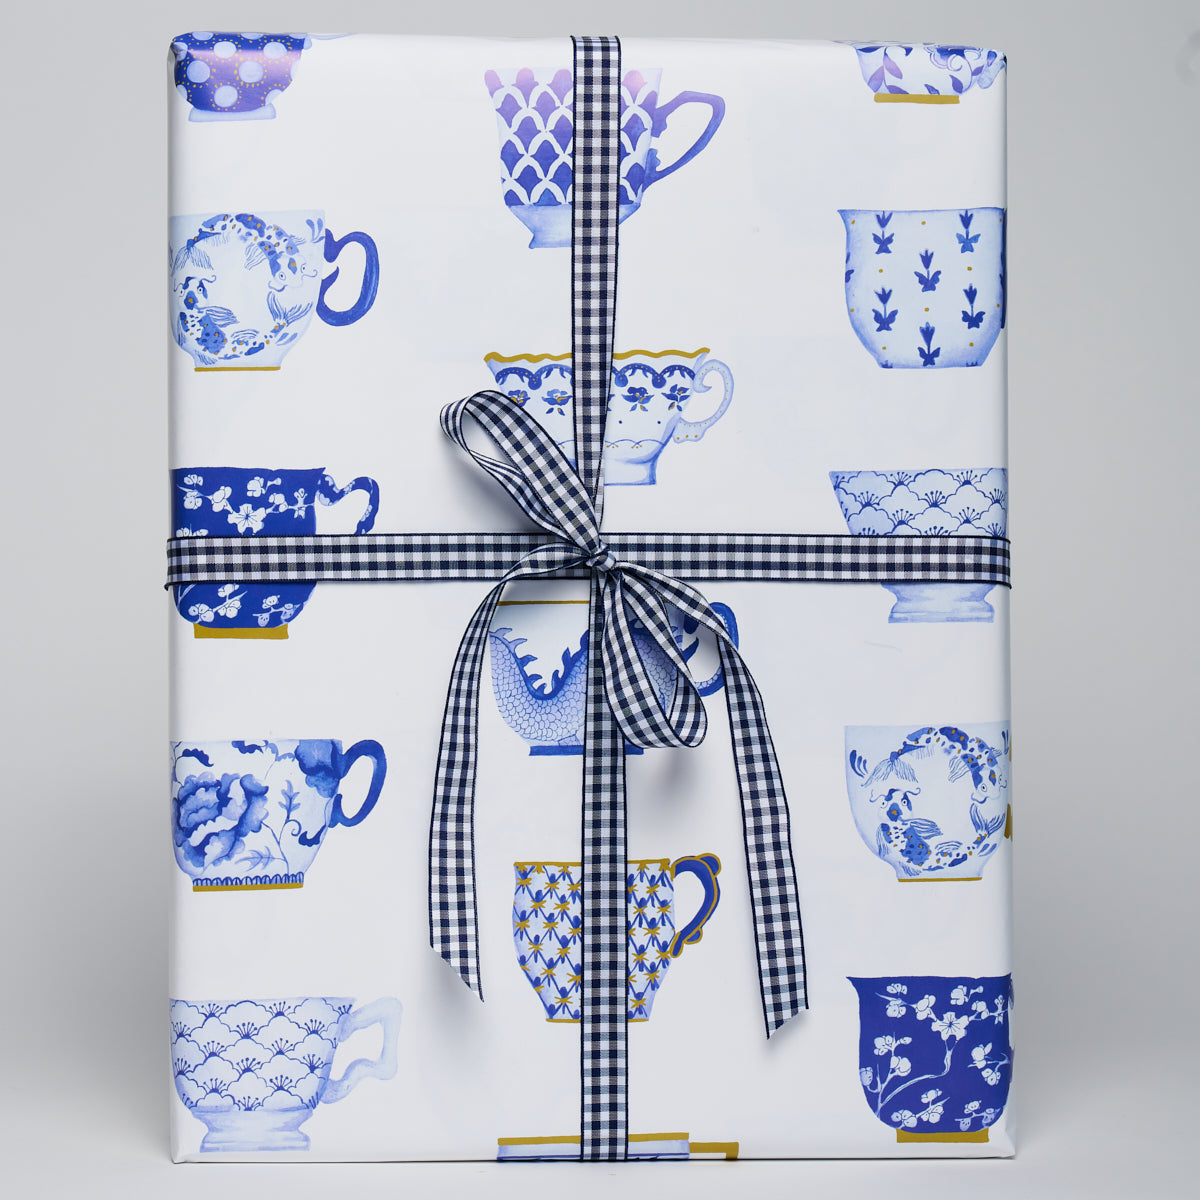 Onie's Teacups Wrapping Paper